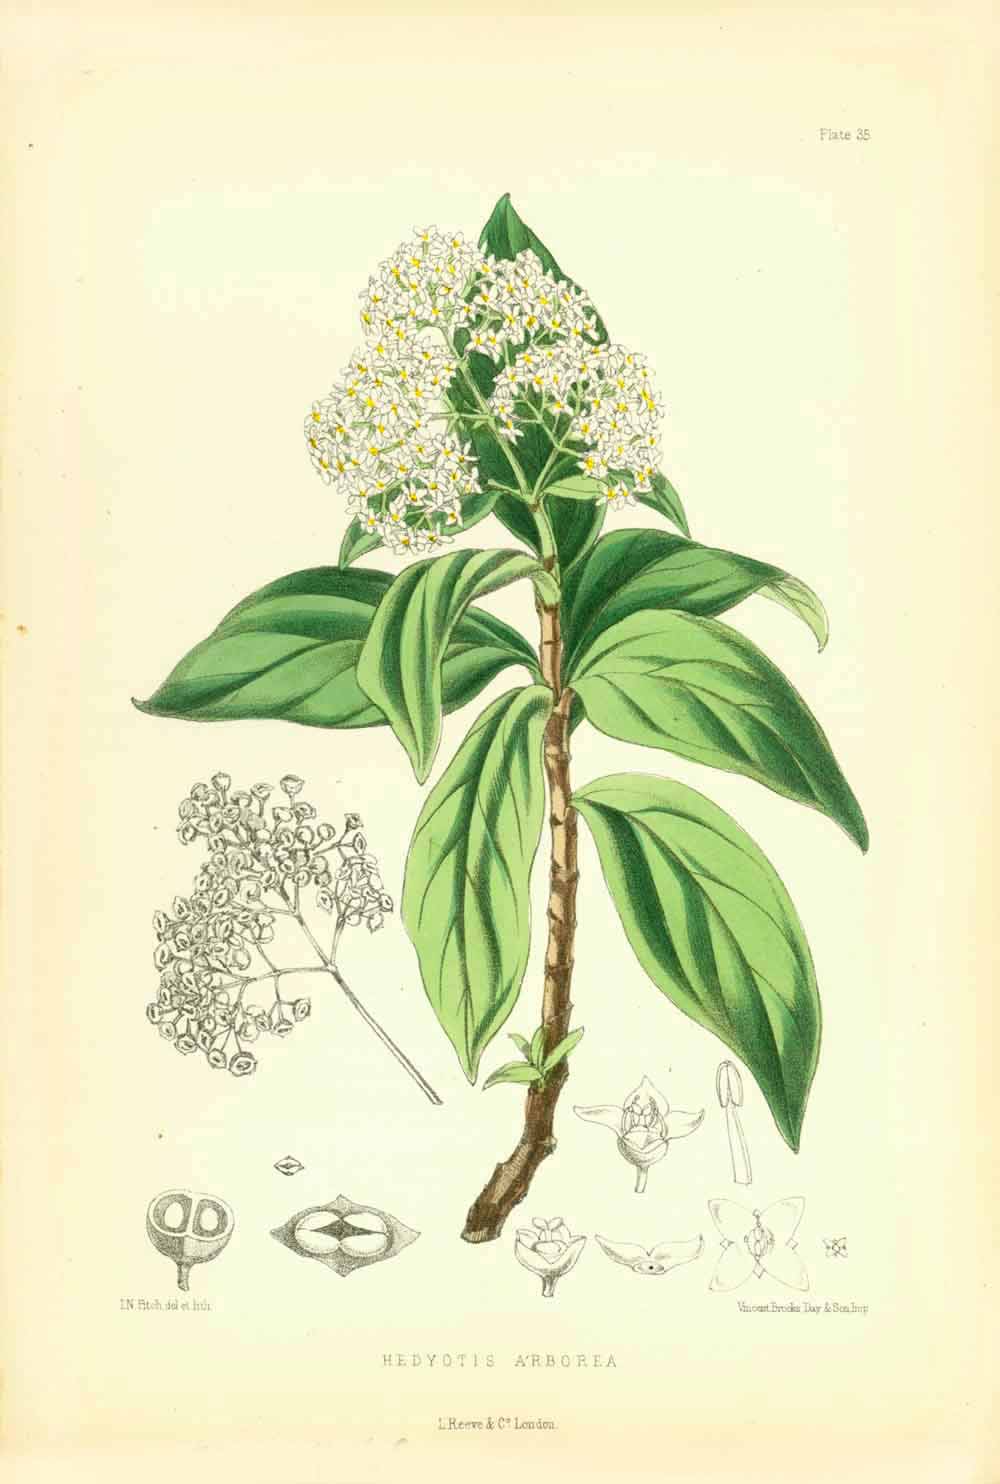 "Hedyotis Arborea"  Set of flowers indigenous to the Island of St. Helena in the South Atlantic.  All lithographs were printed in colour. Various artists.  Published in "St. Helena" by John Charles Melliss London, 1875